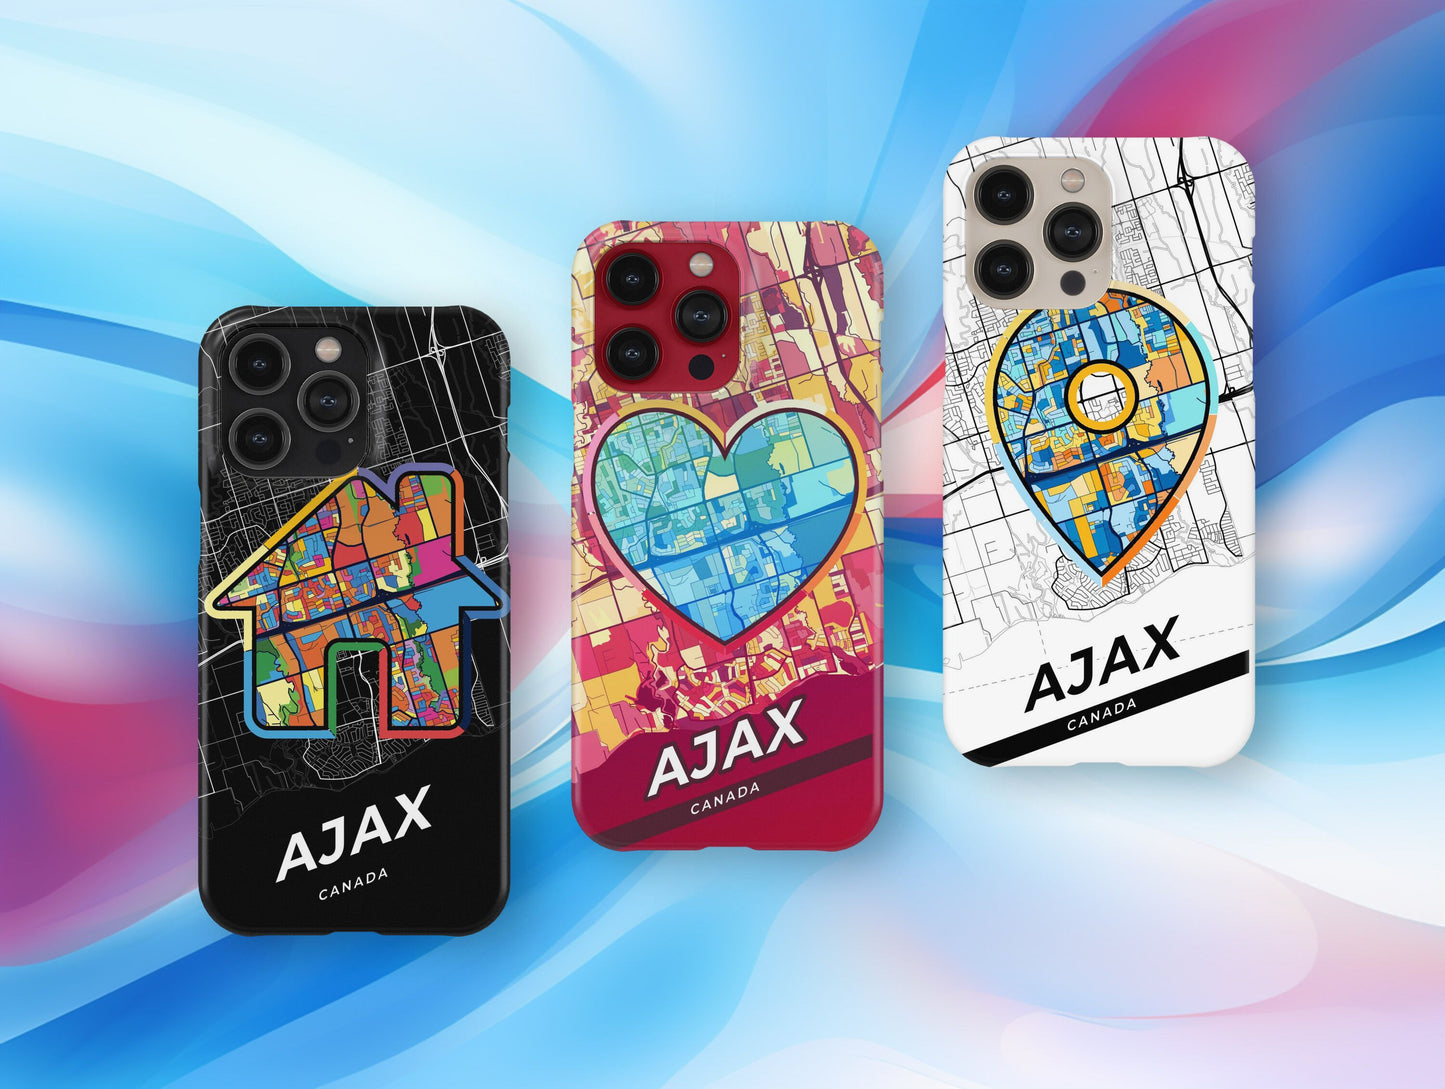 Ajax Canada slim phone case with colorful icon. Birthday, wedding or housewarming gift. Couple match cases.